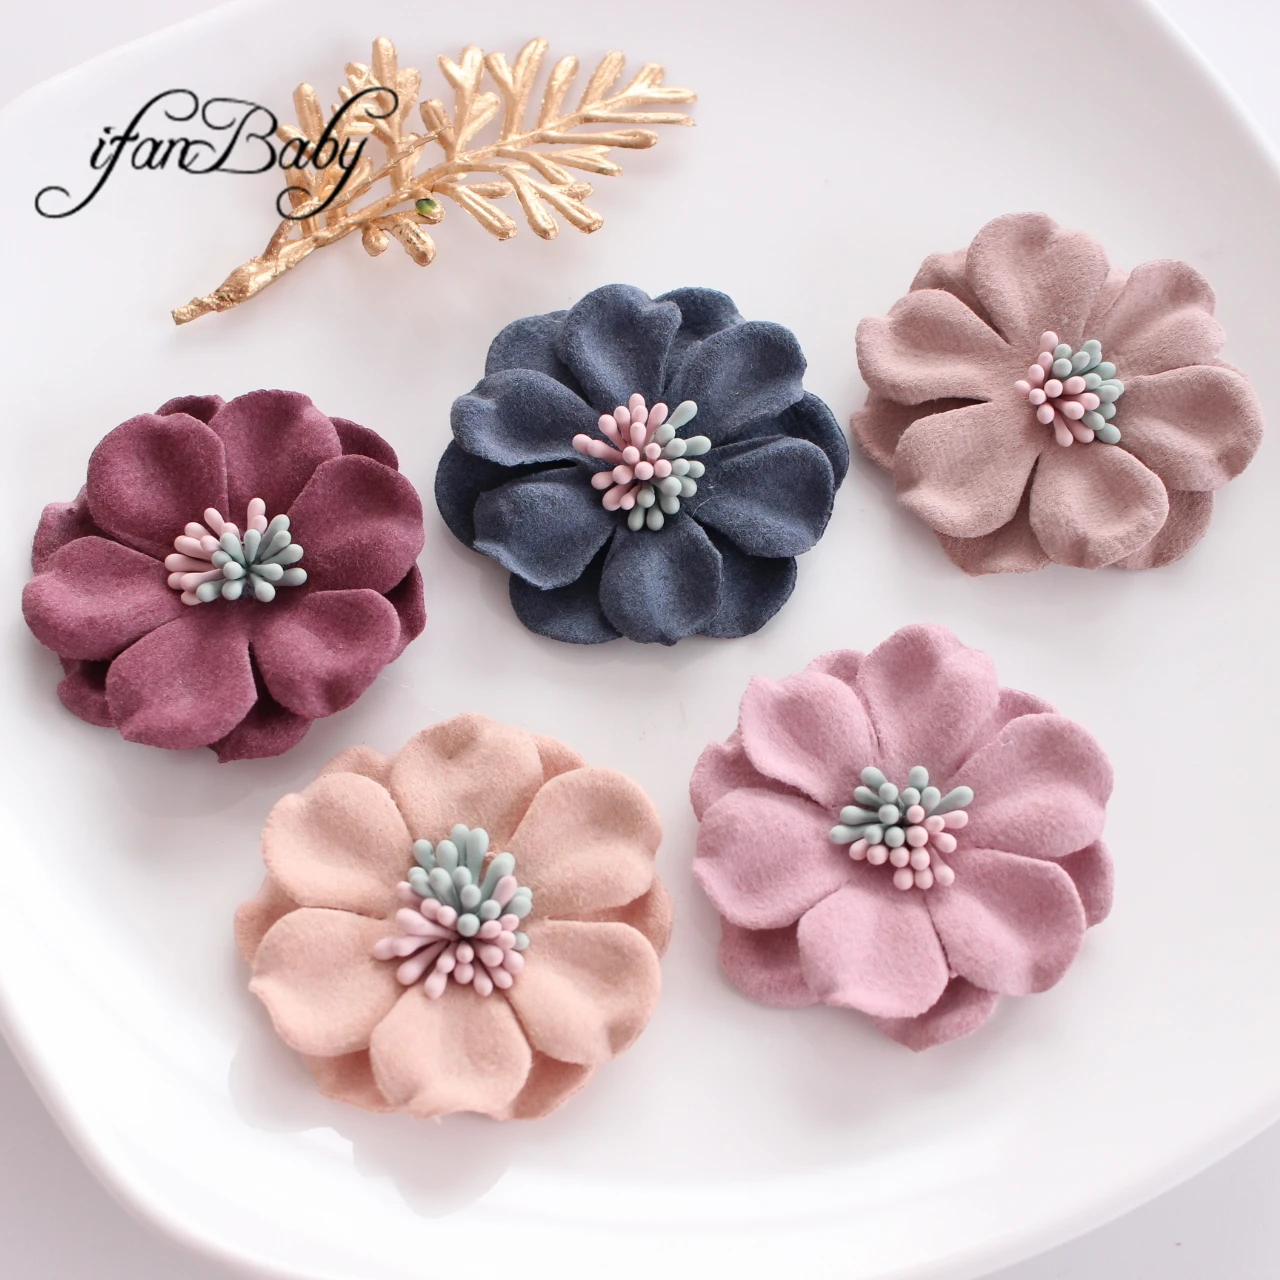 

5cm Synthetic Leather Hair Flower With Stamen Hair Accessories CRAFT Appliques Embellishments Decoration Artificial Floral